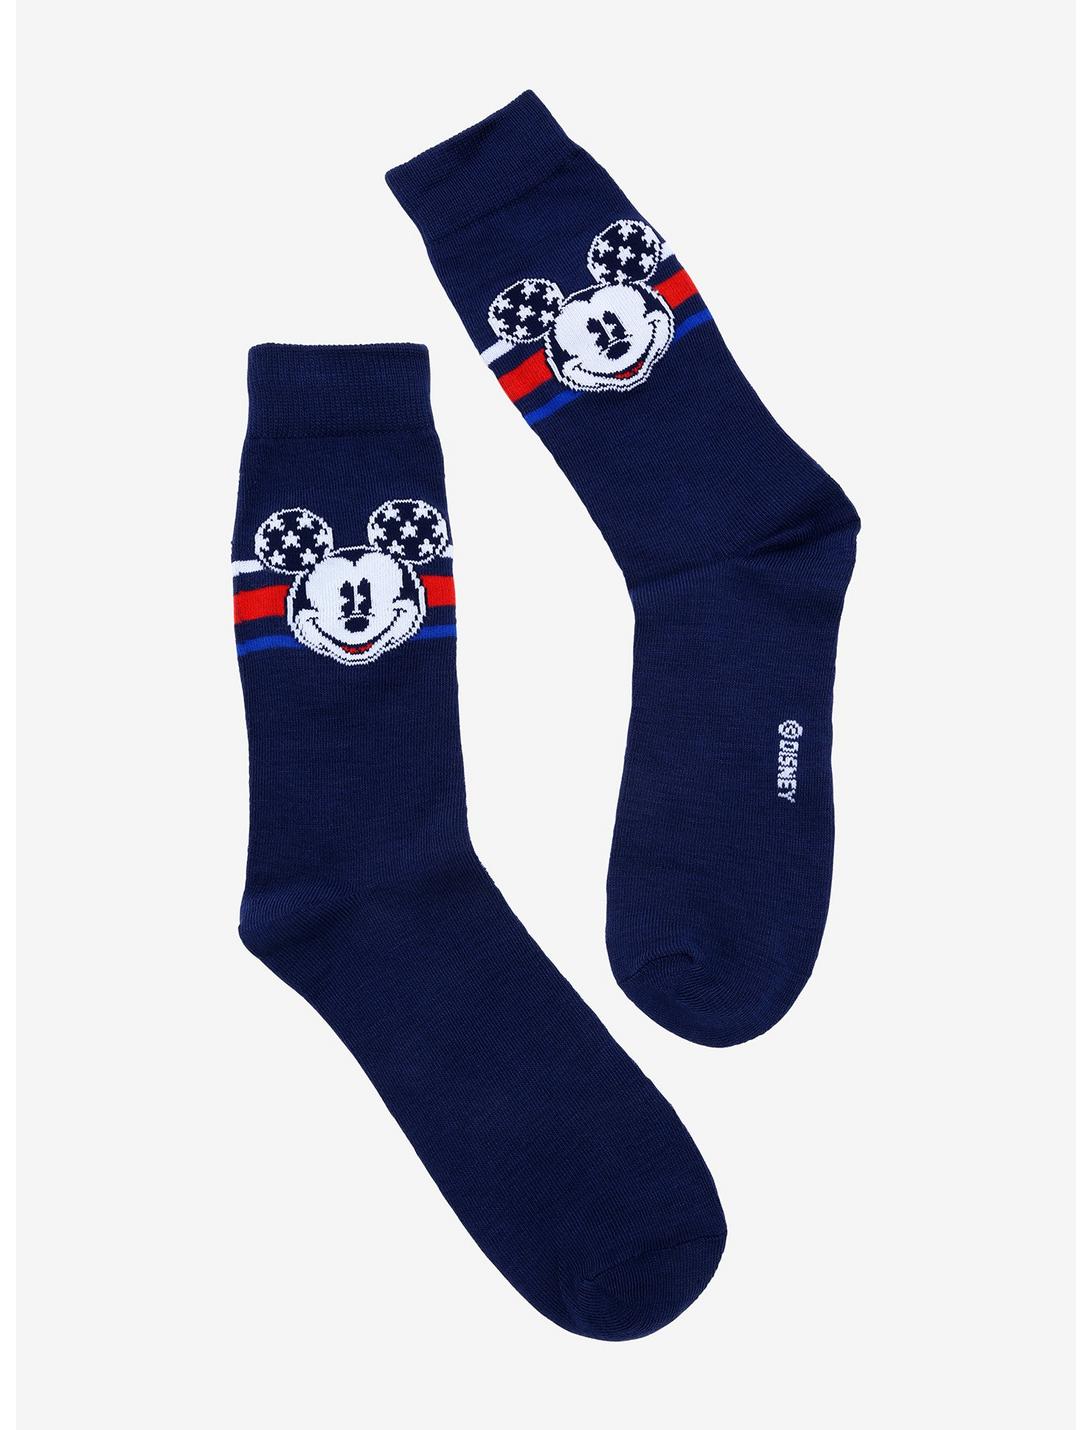 Disney Mickey Mouse Red White Blue Crew Socks, , hi-res